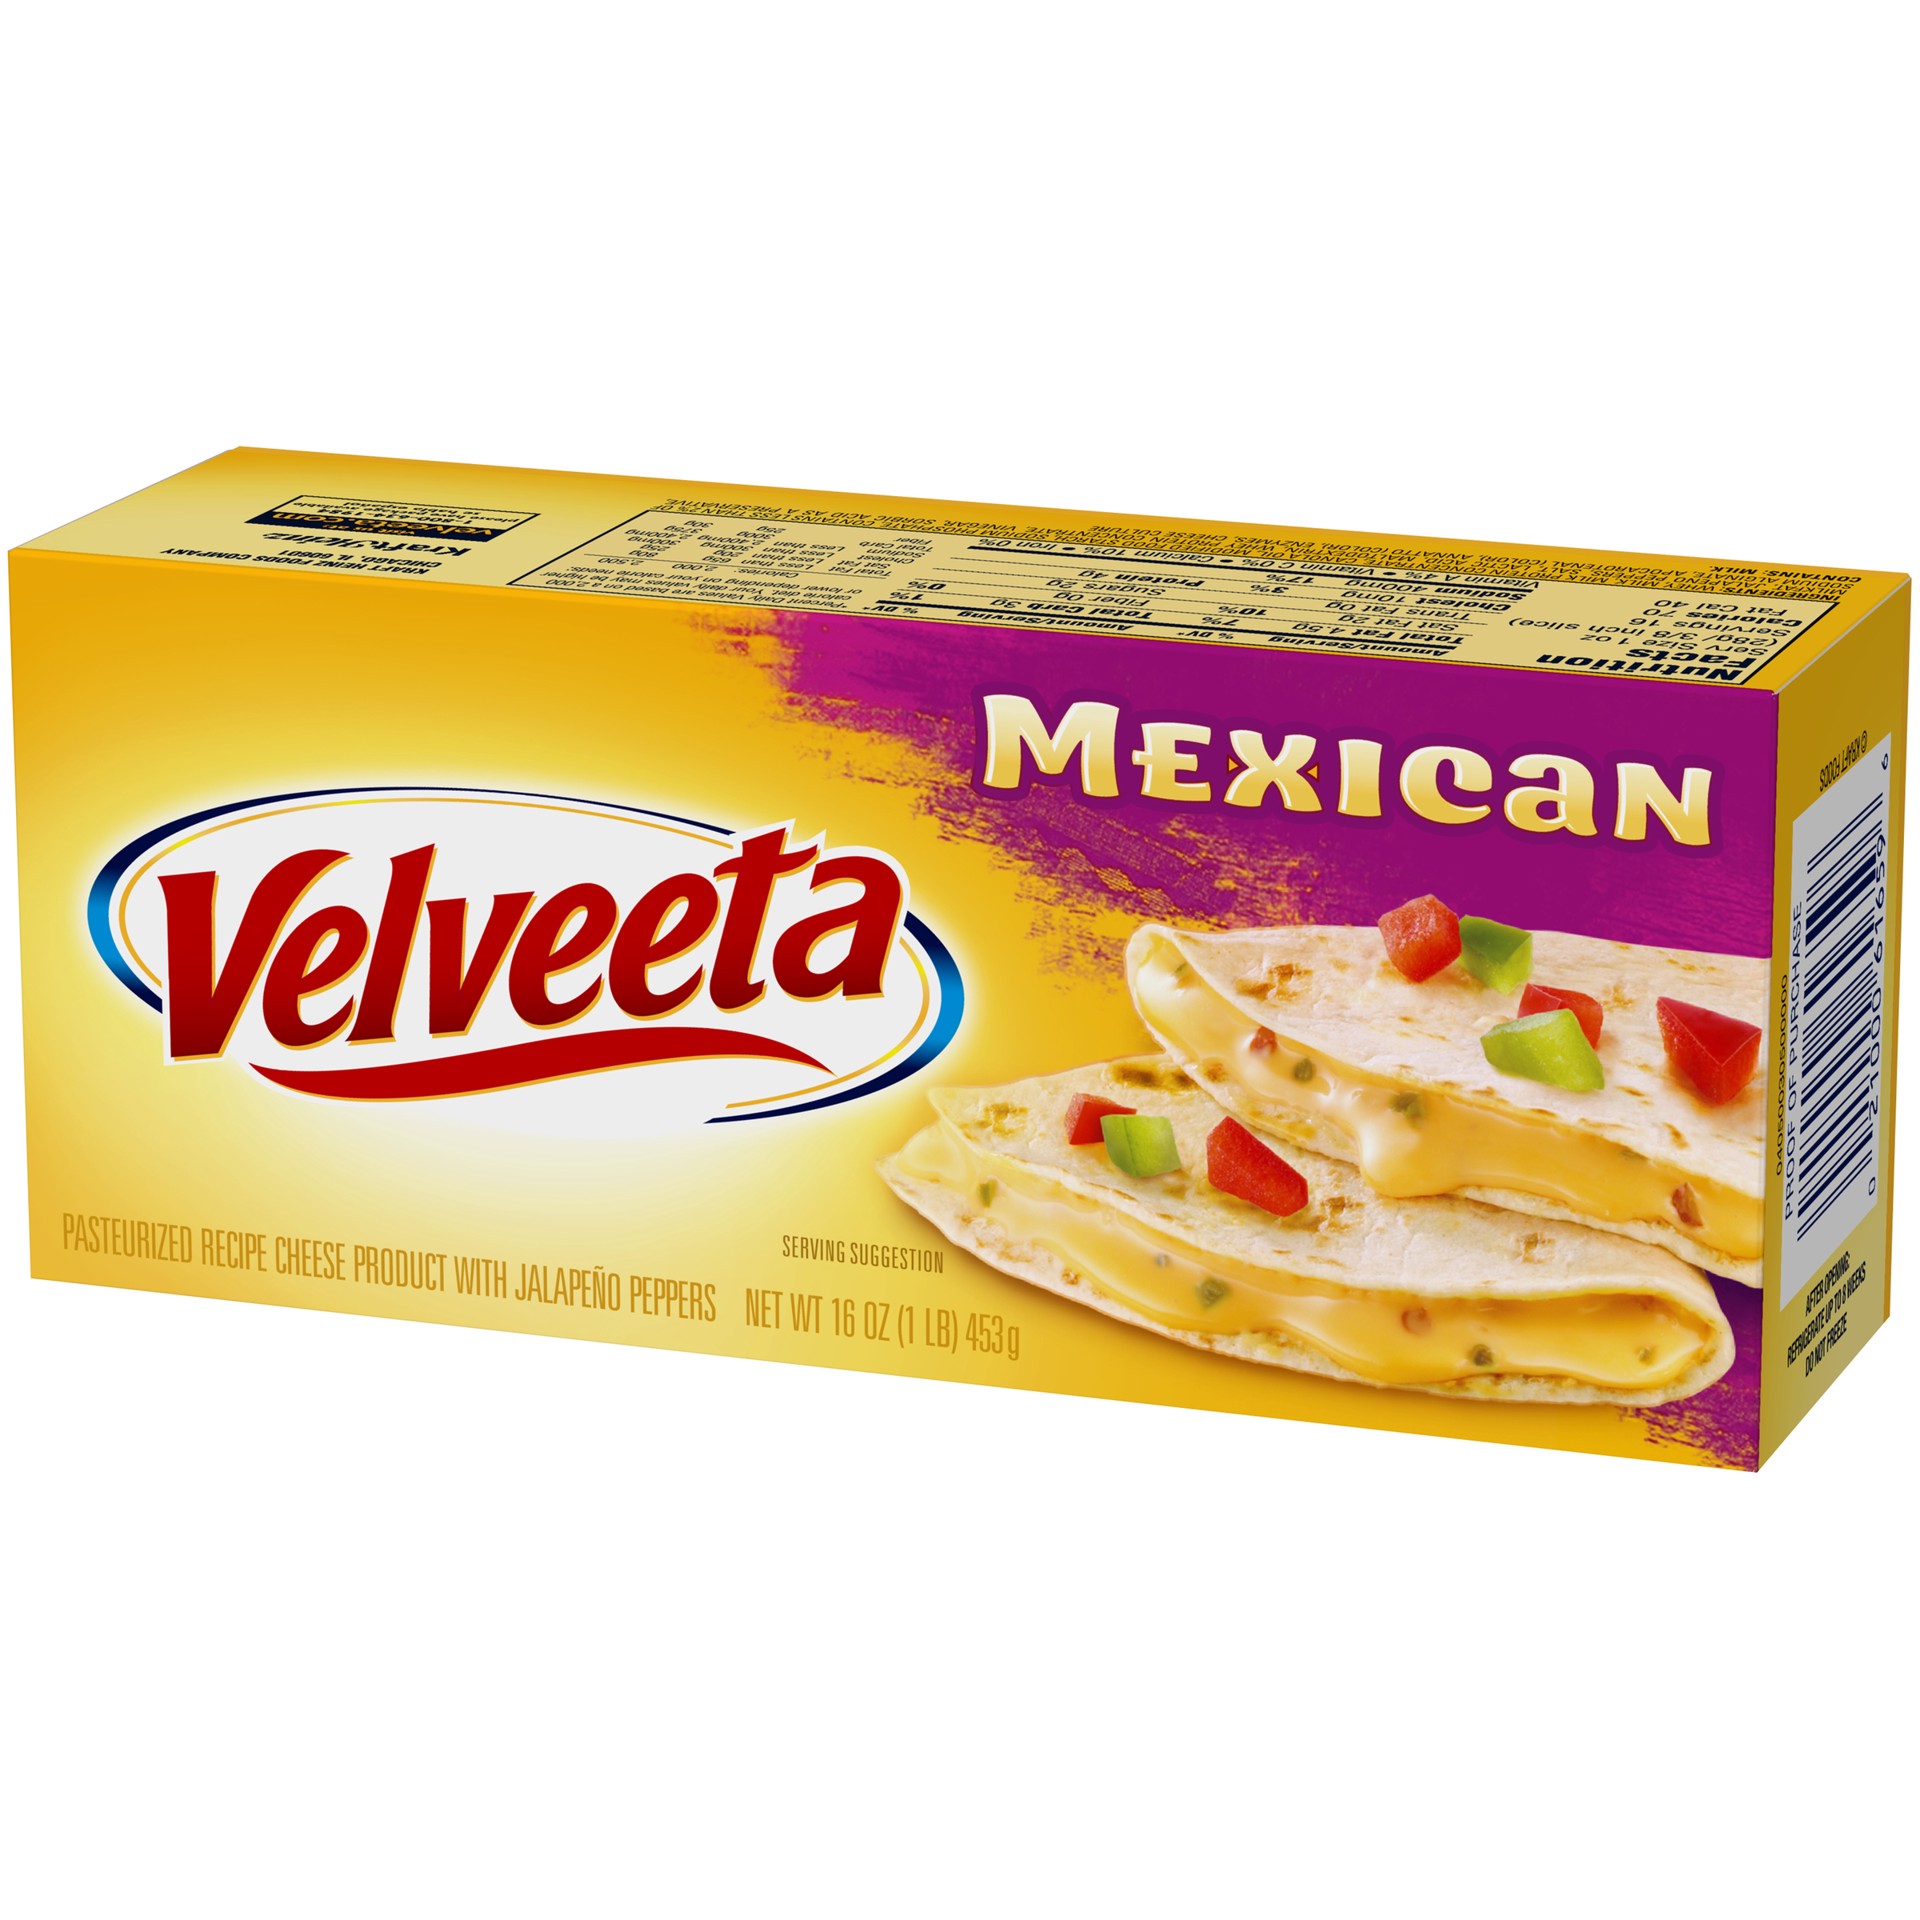 slide 4 of 6, Velveeta Mexican Pasteurized Recipe Cheese Product with Jalapeno Peppers Block, 16 oz